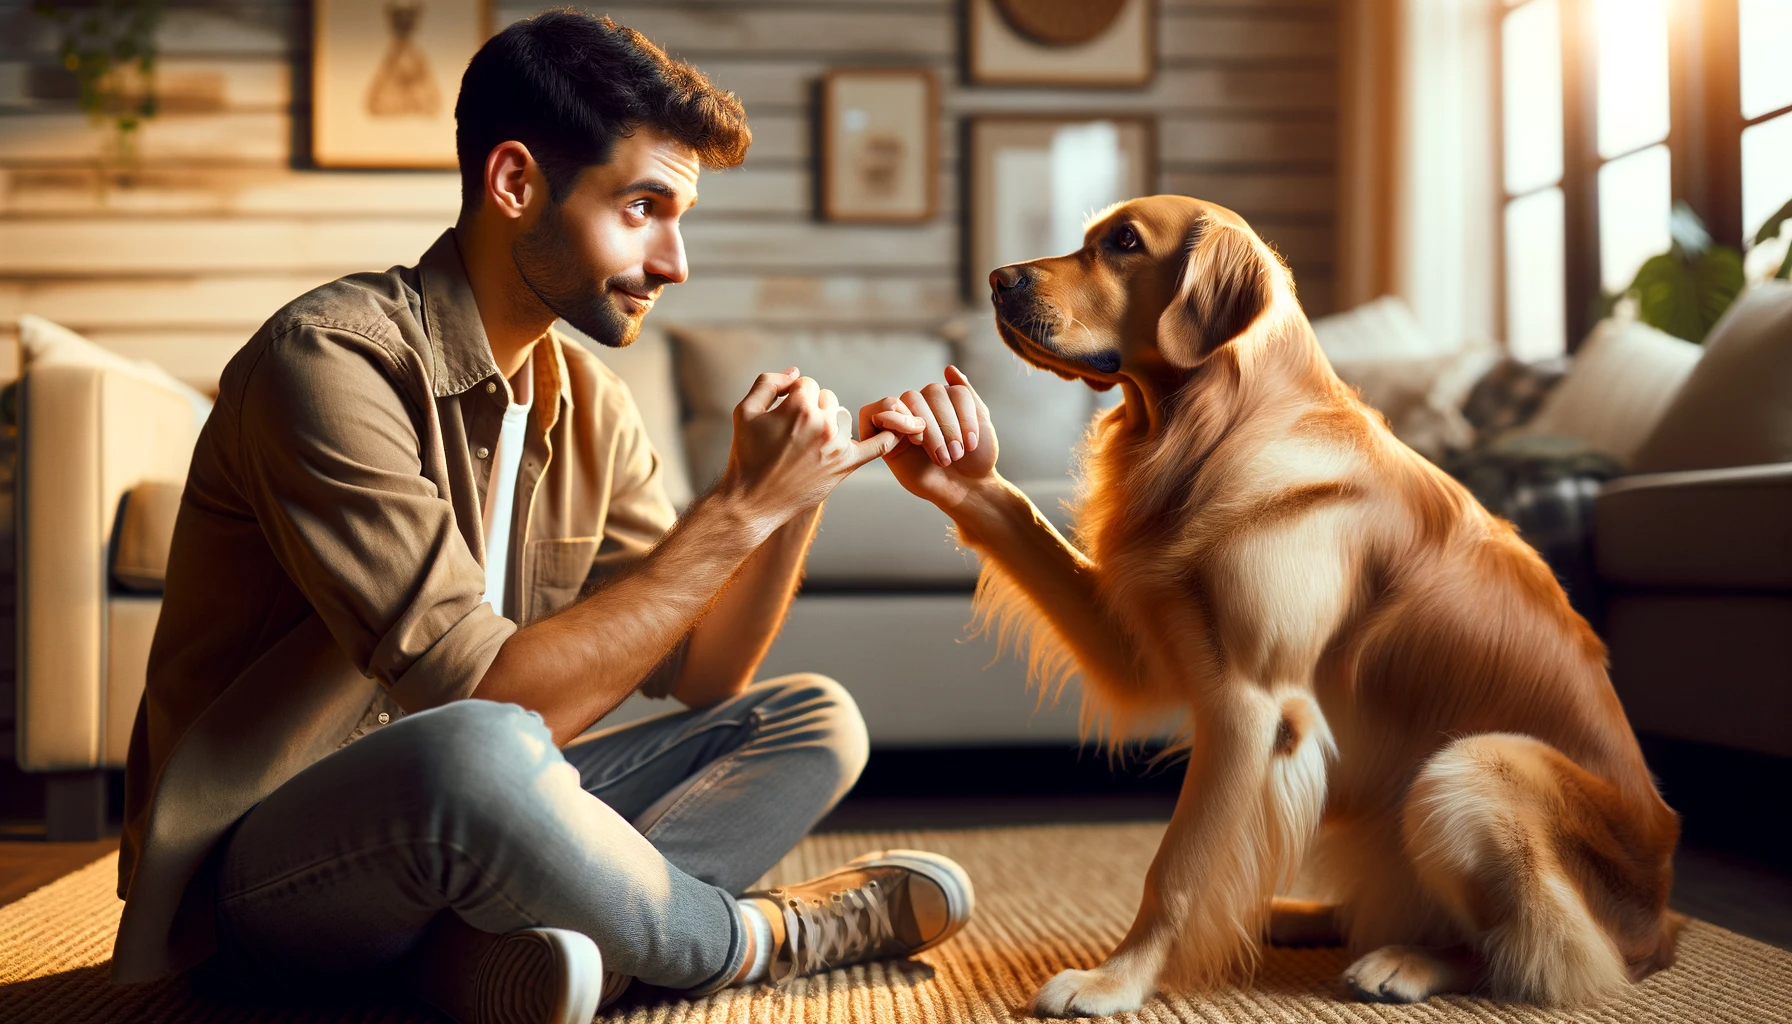 A Goldador doing a 'pinky promise' with its owner's hand, sealing the deal on a long, happy life together